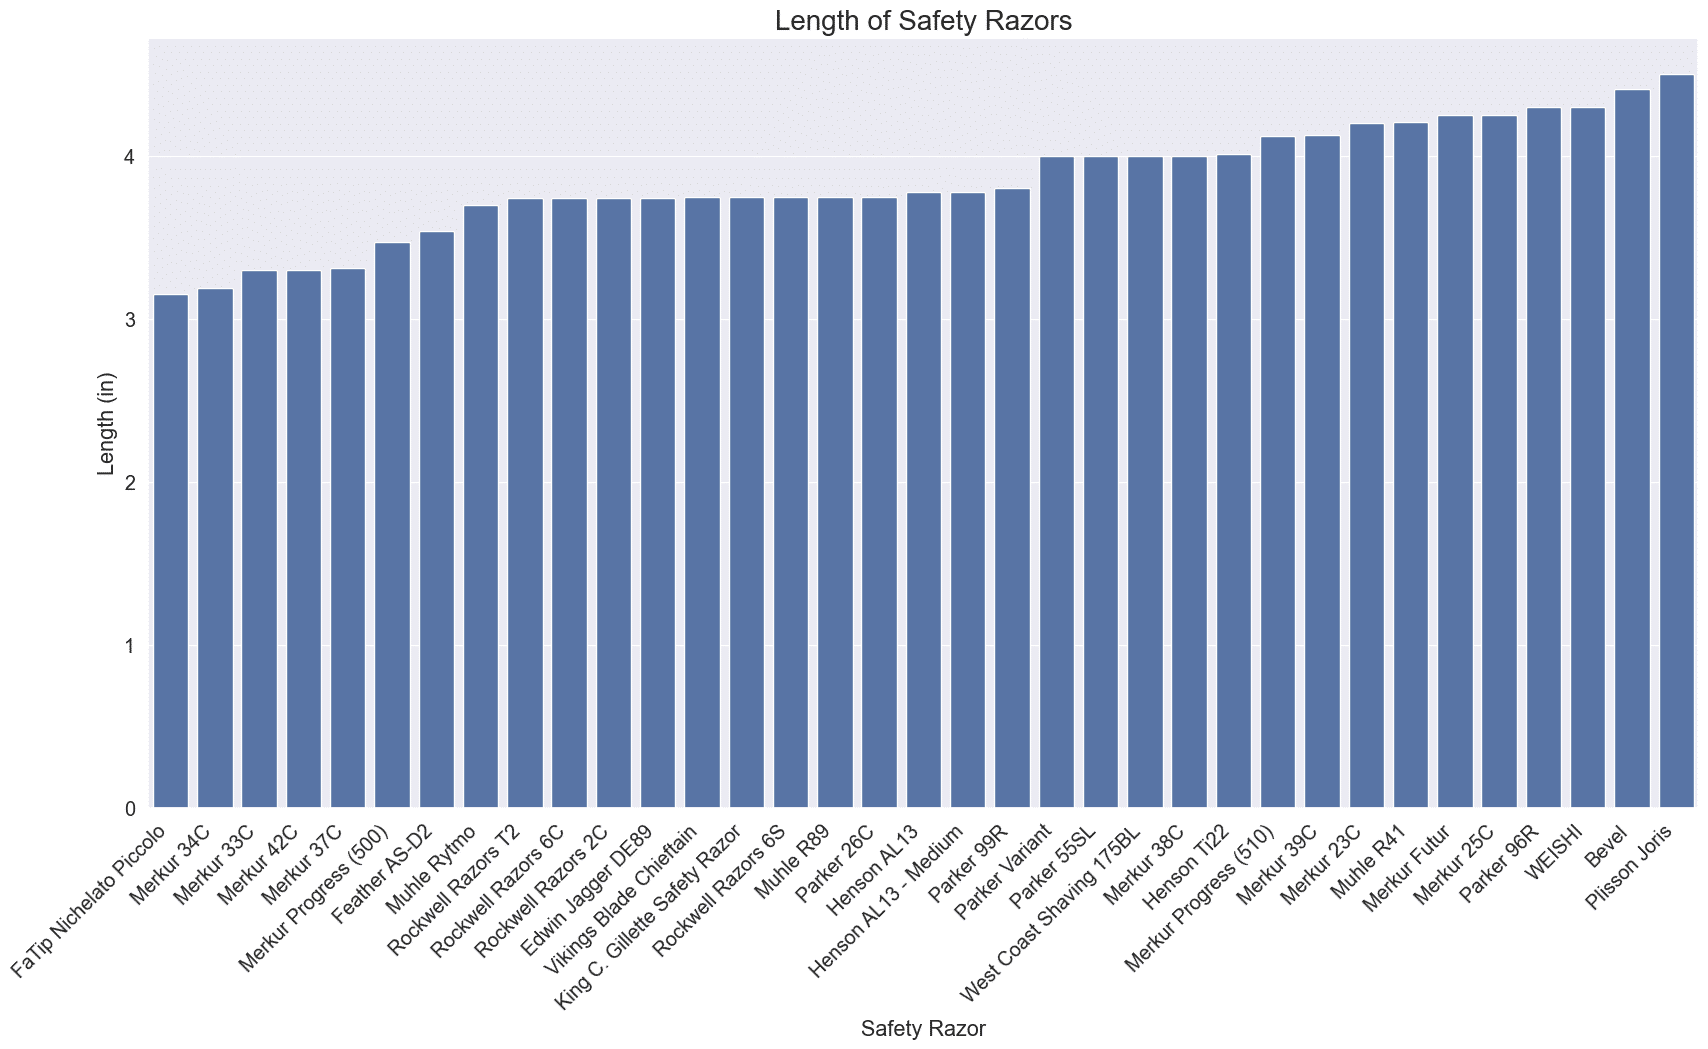 graph comparing the length of several safety razors